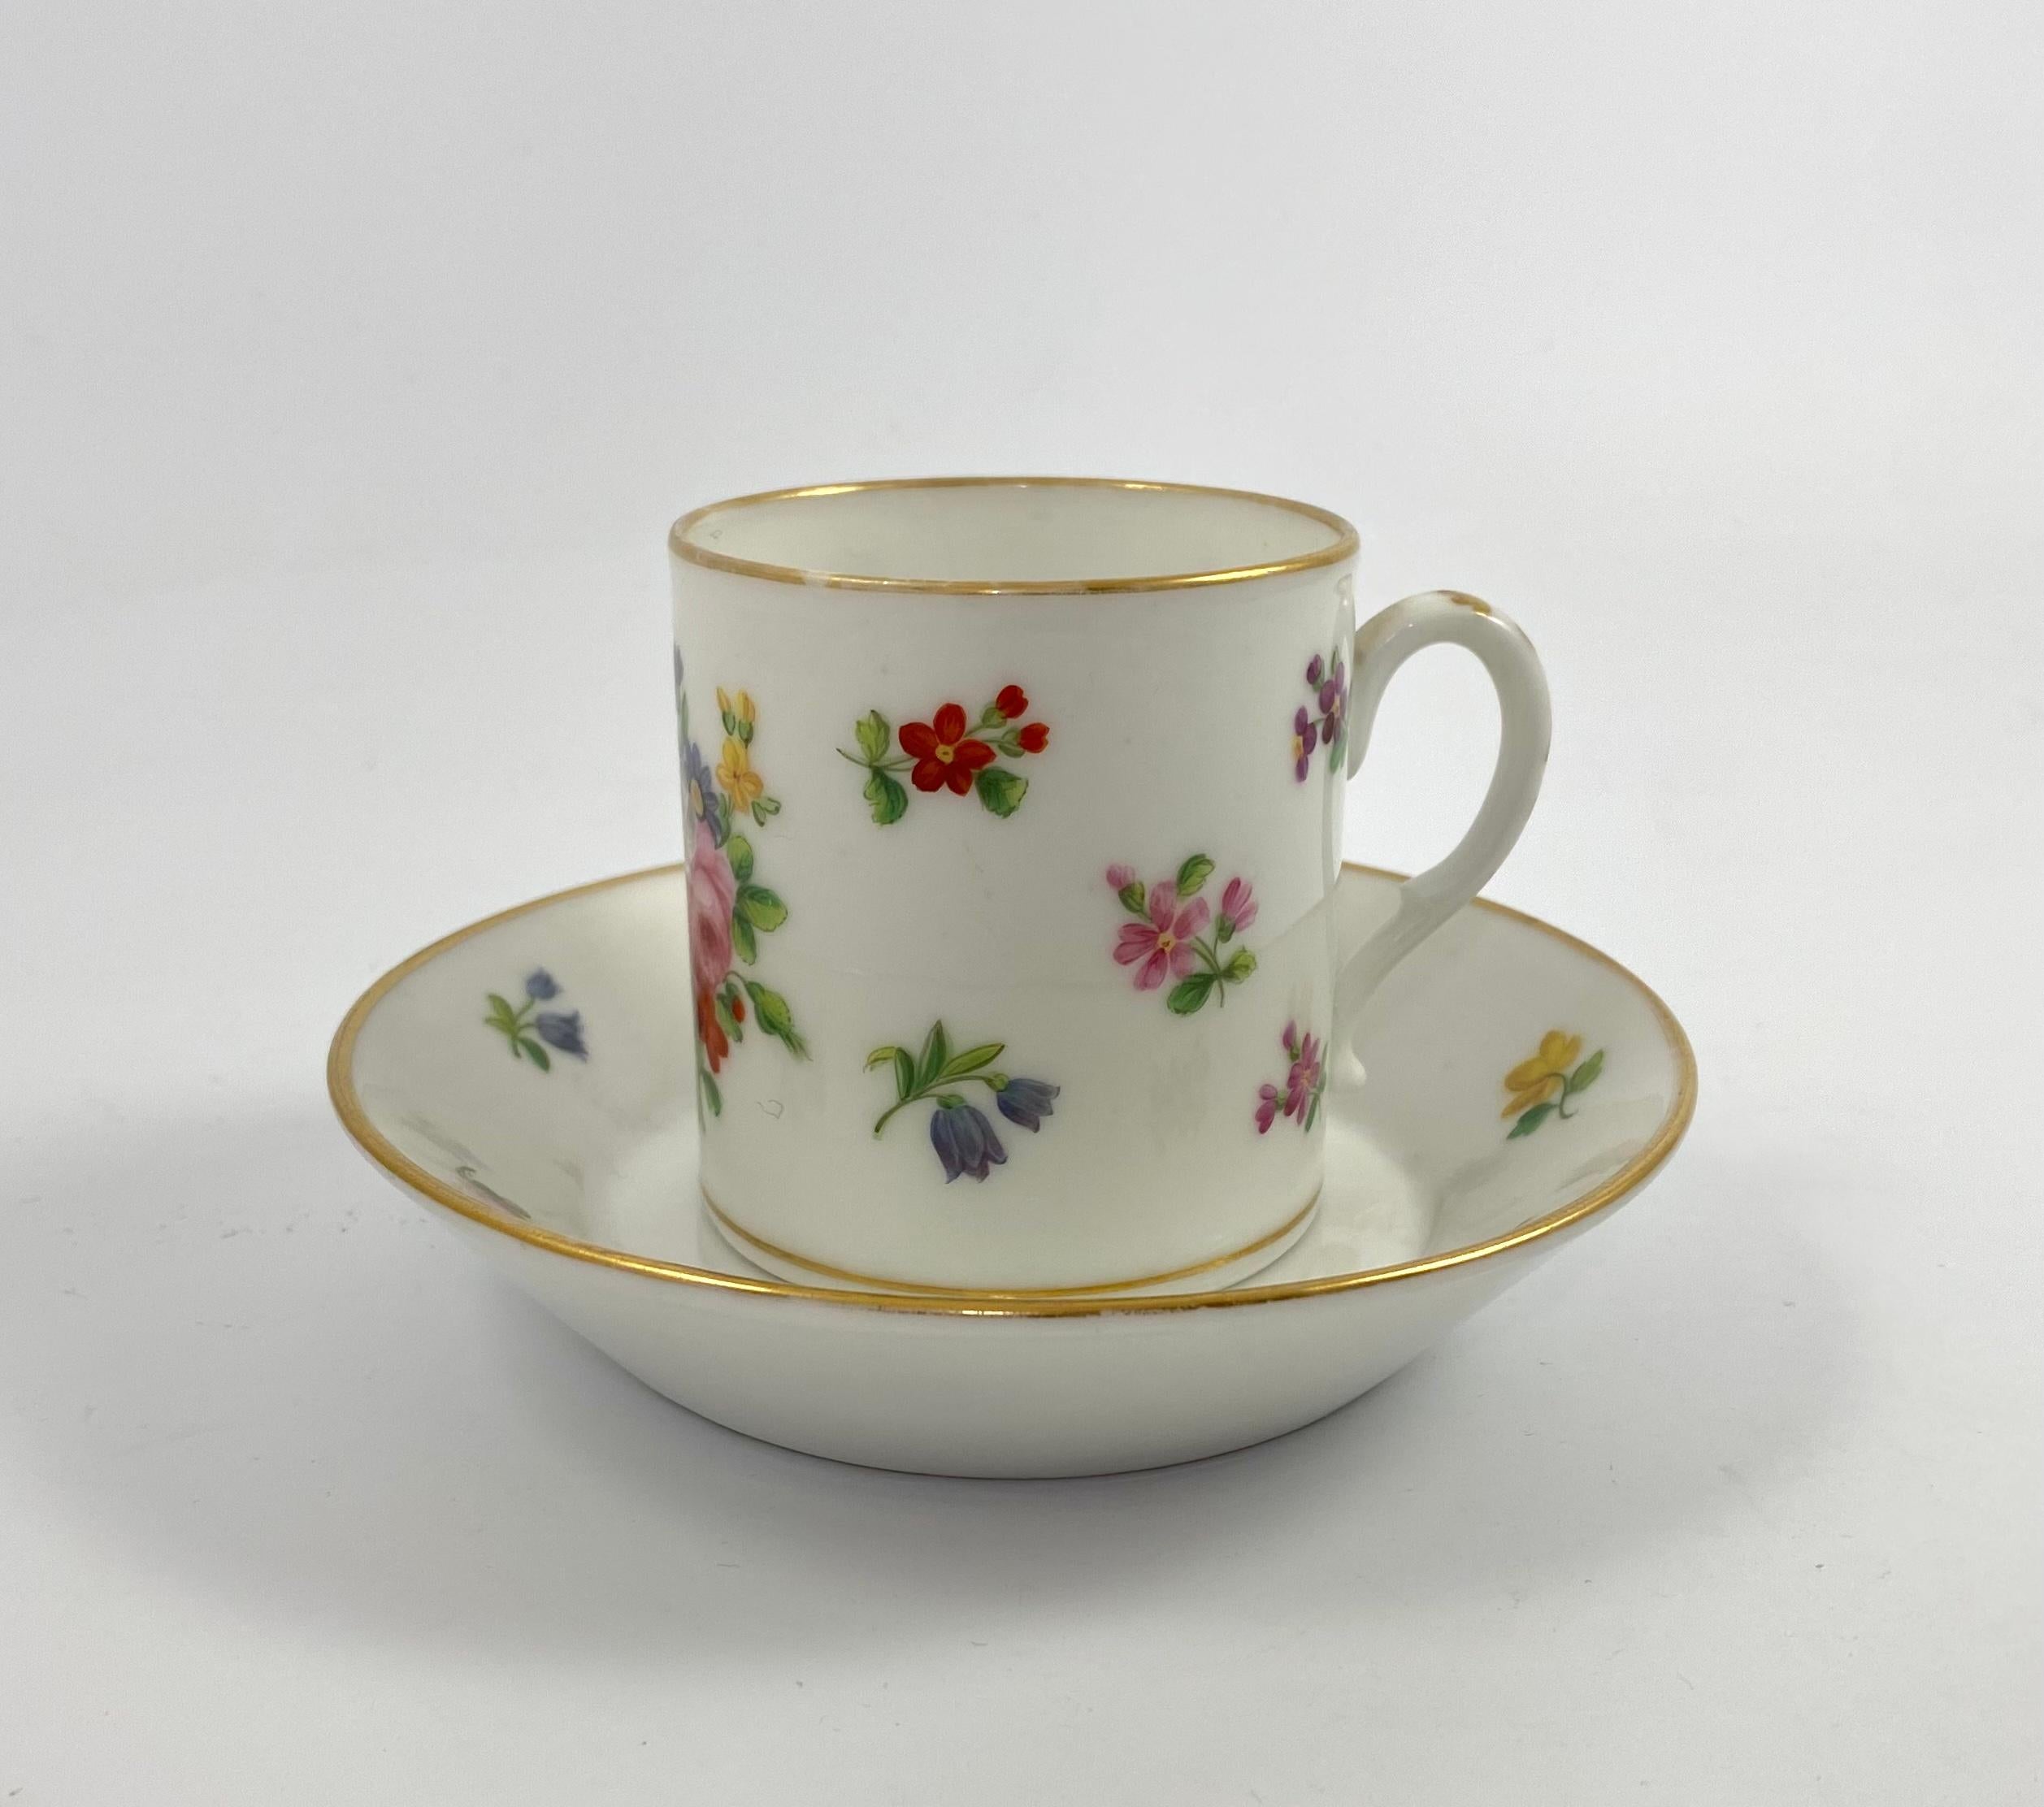 Fired Paris Porcelain Coffee Can and Saucer, C. 1830